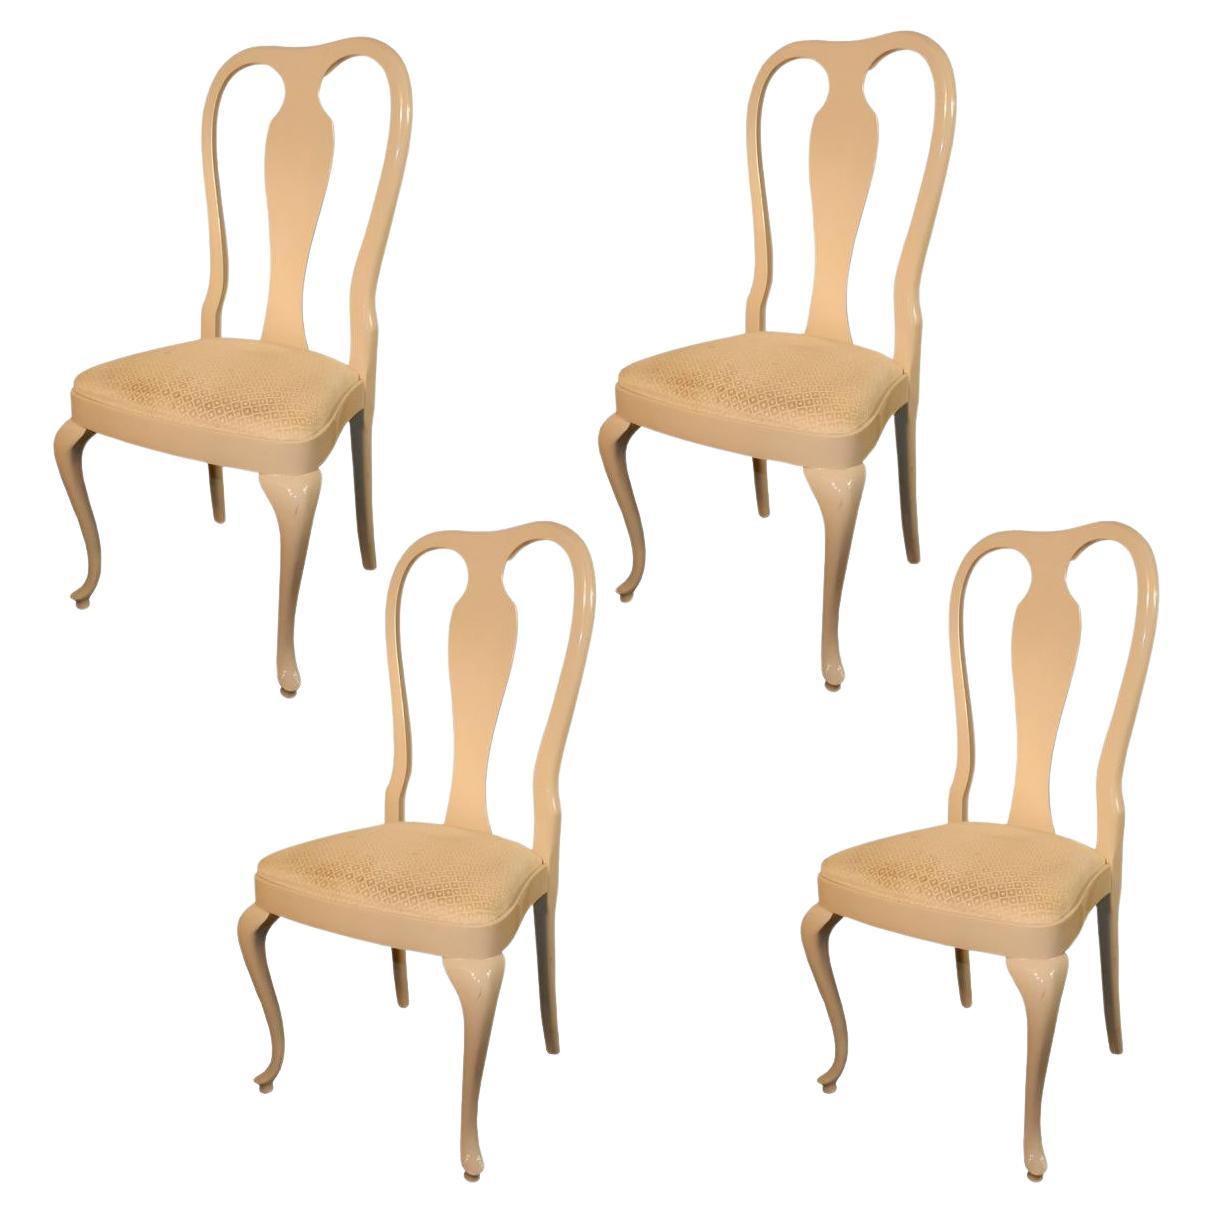 Rocco Turzi Decoration, Four Queen Ann Style Chairs in Lacquered Wood circa 1970 For Sale